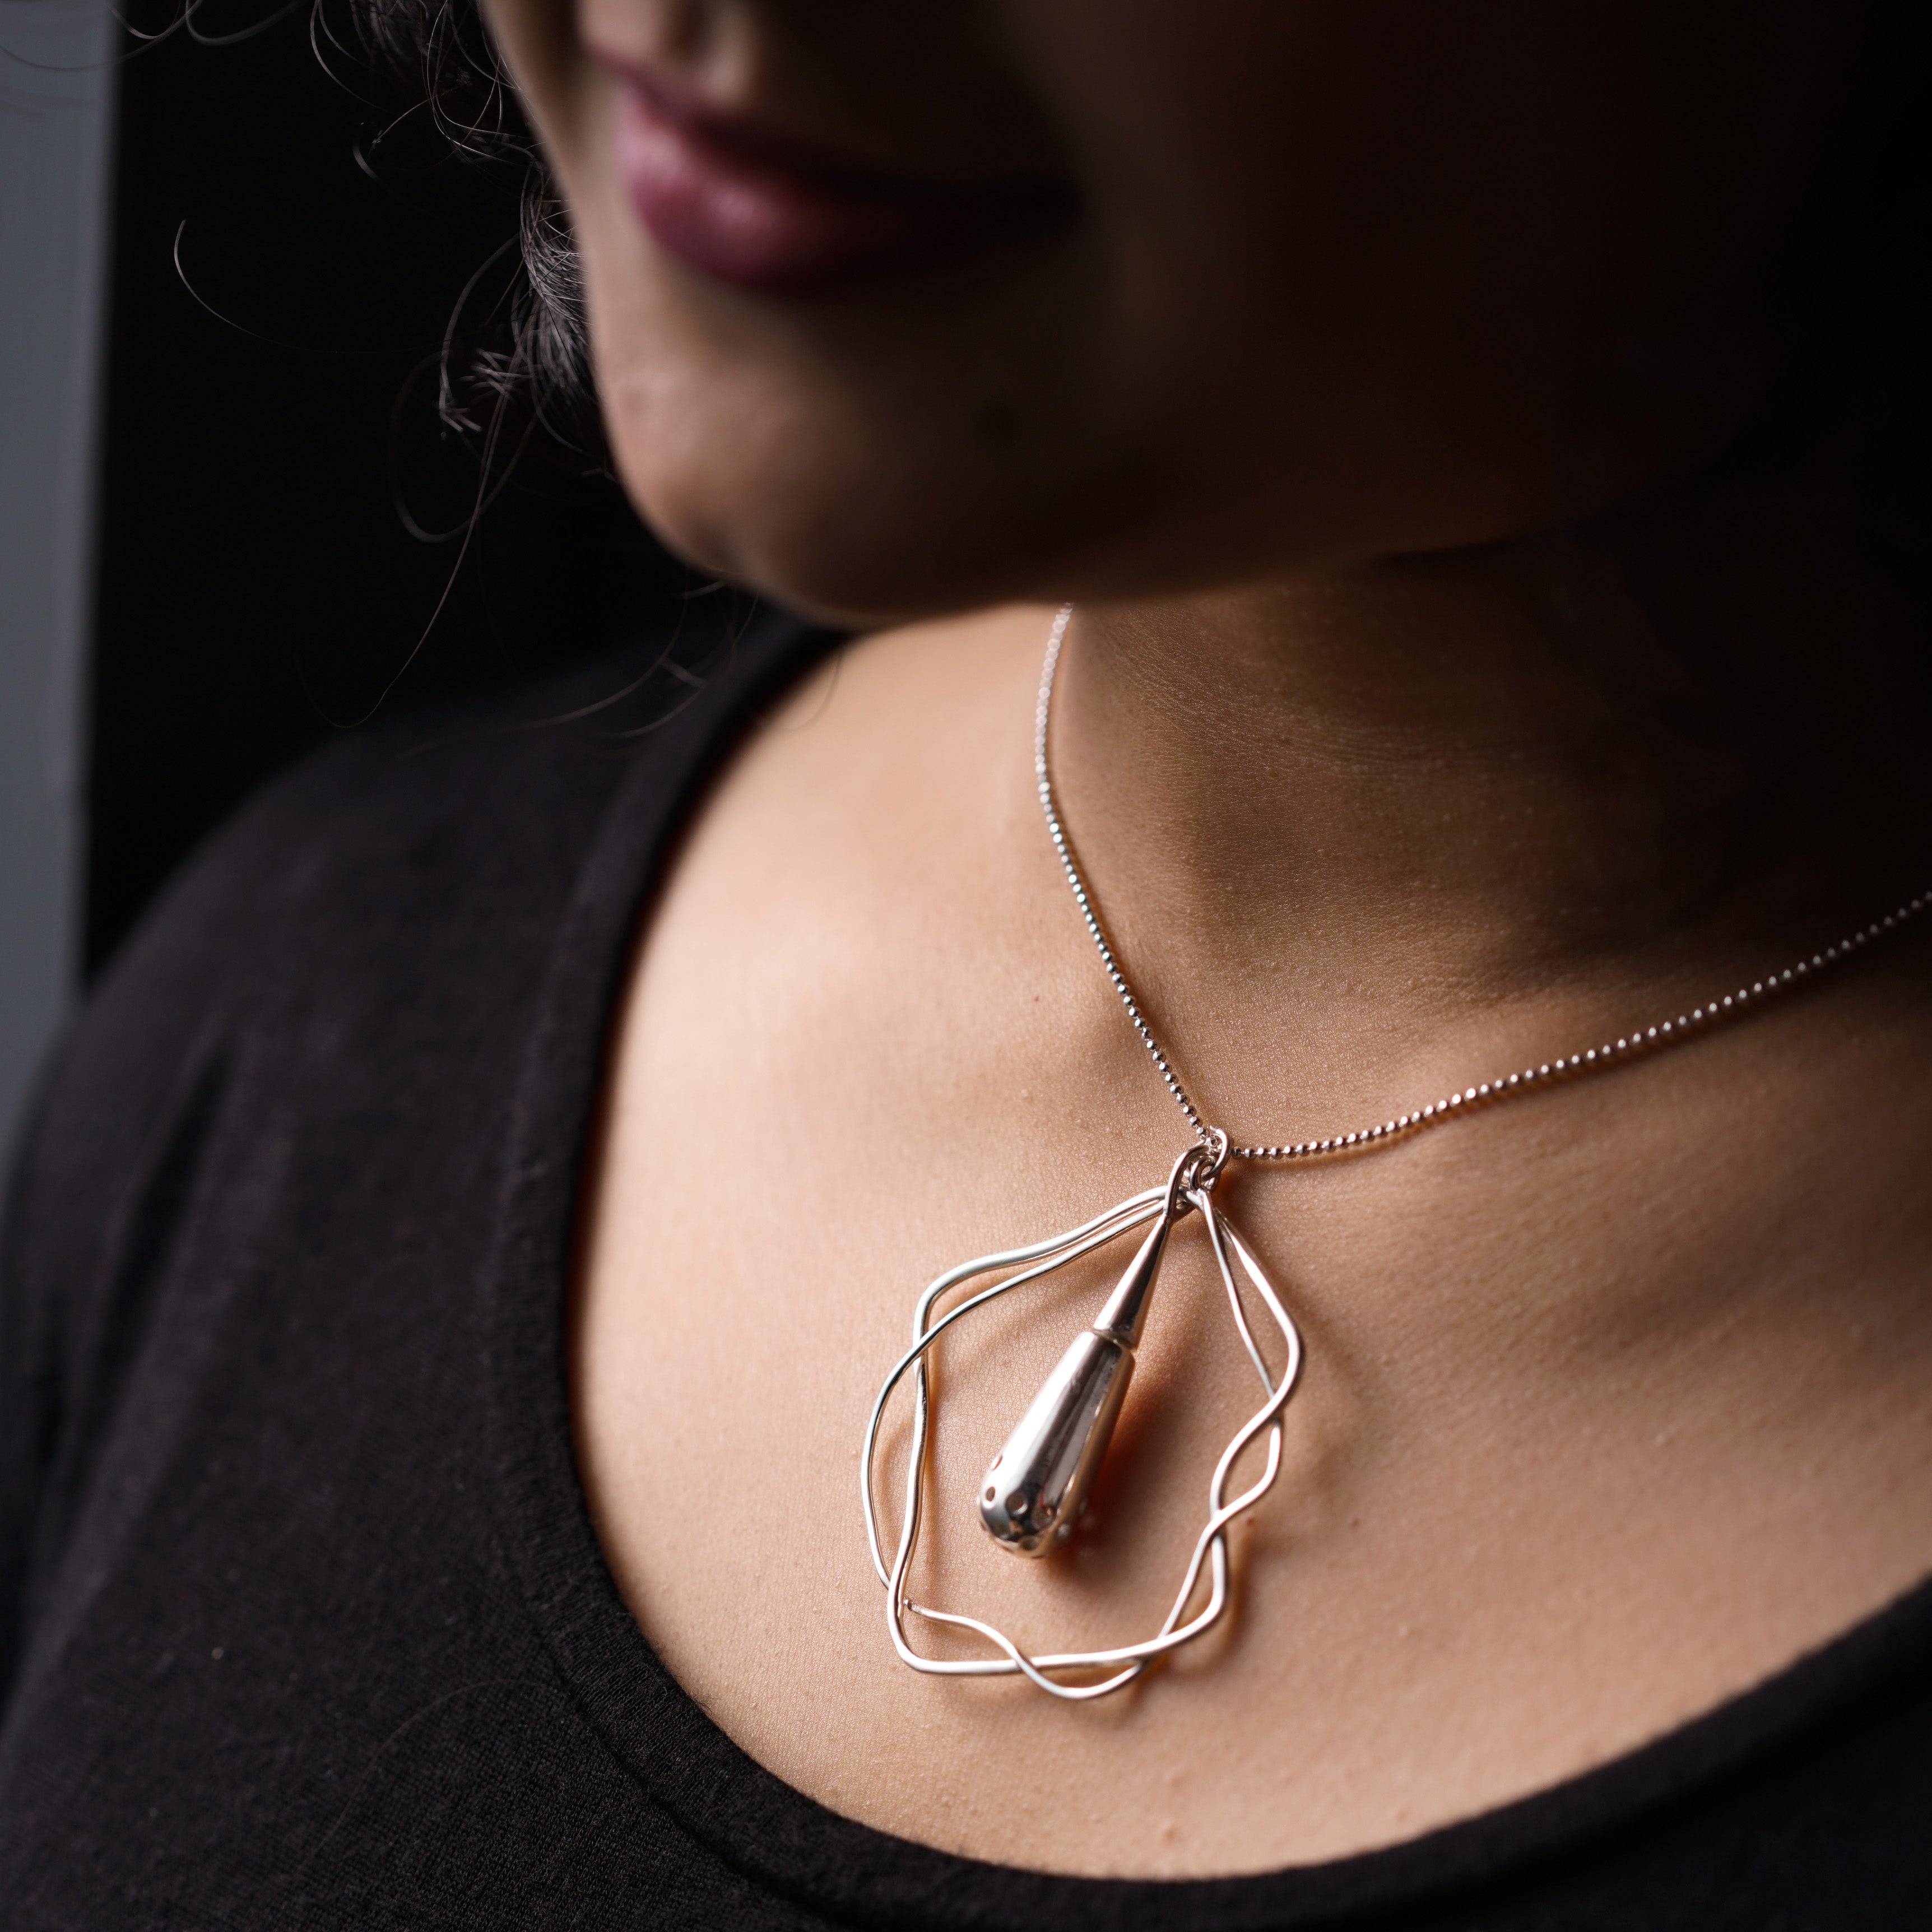 a woman wearing a necklace with a wire wrapped around it